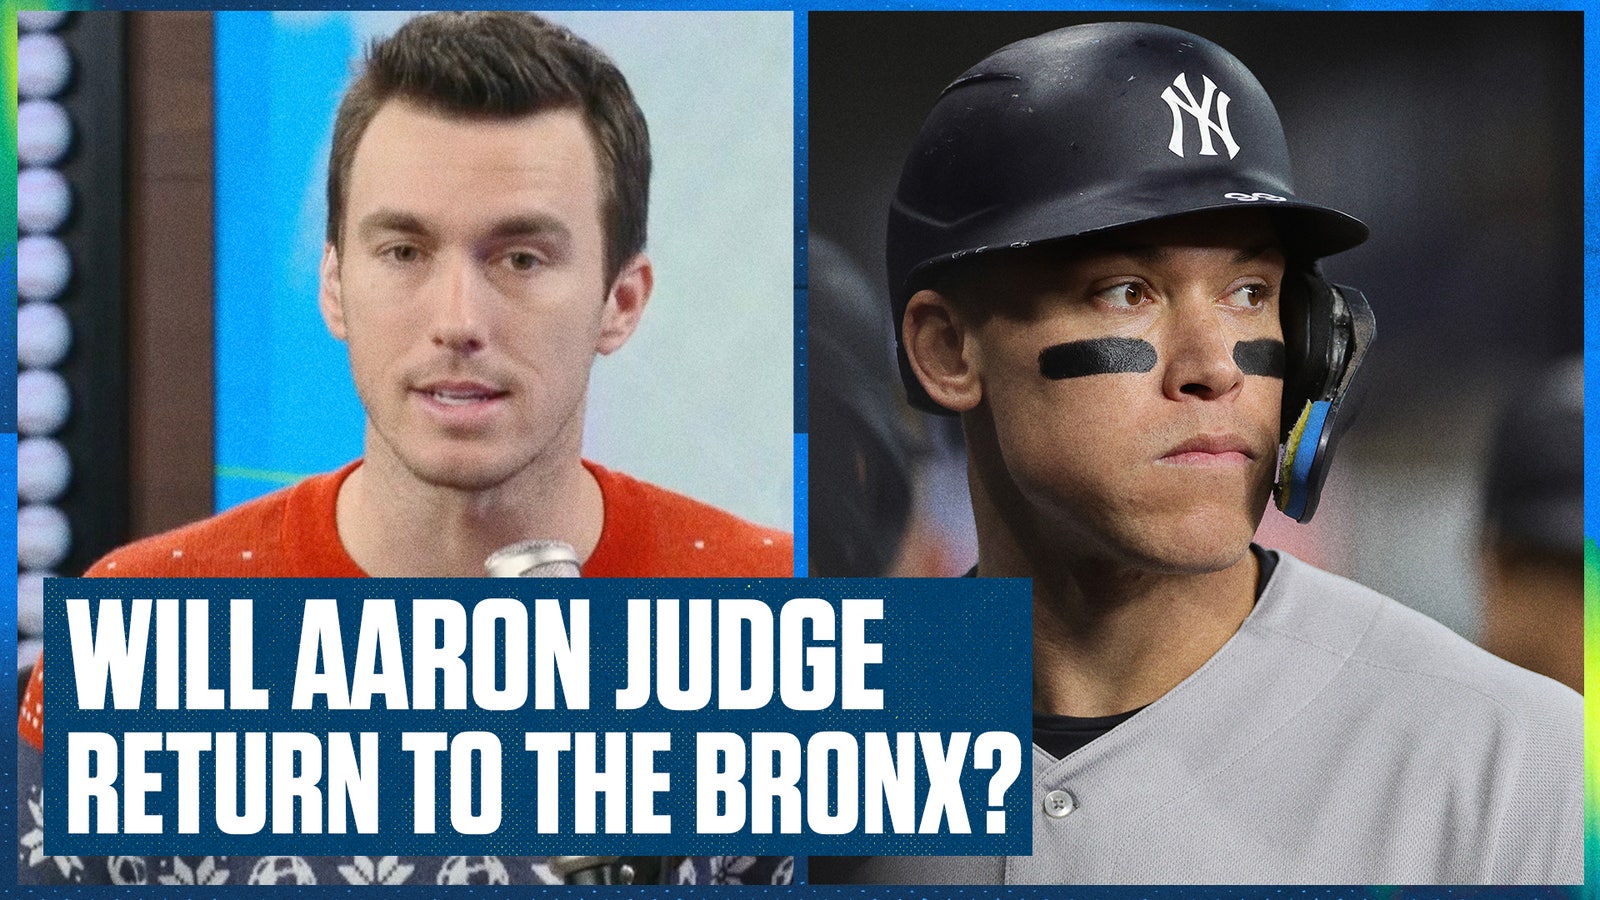 Will the New York Yankees pay up for Aaron Judge?